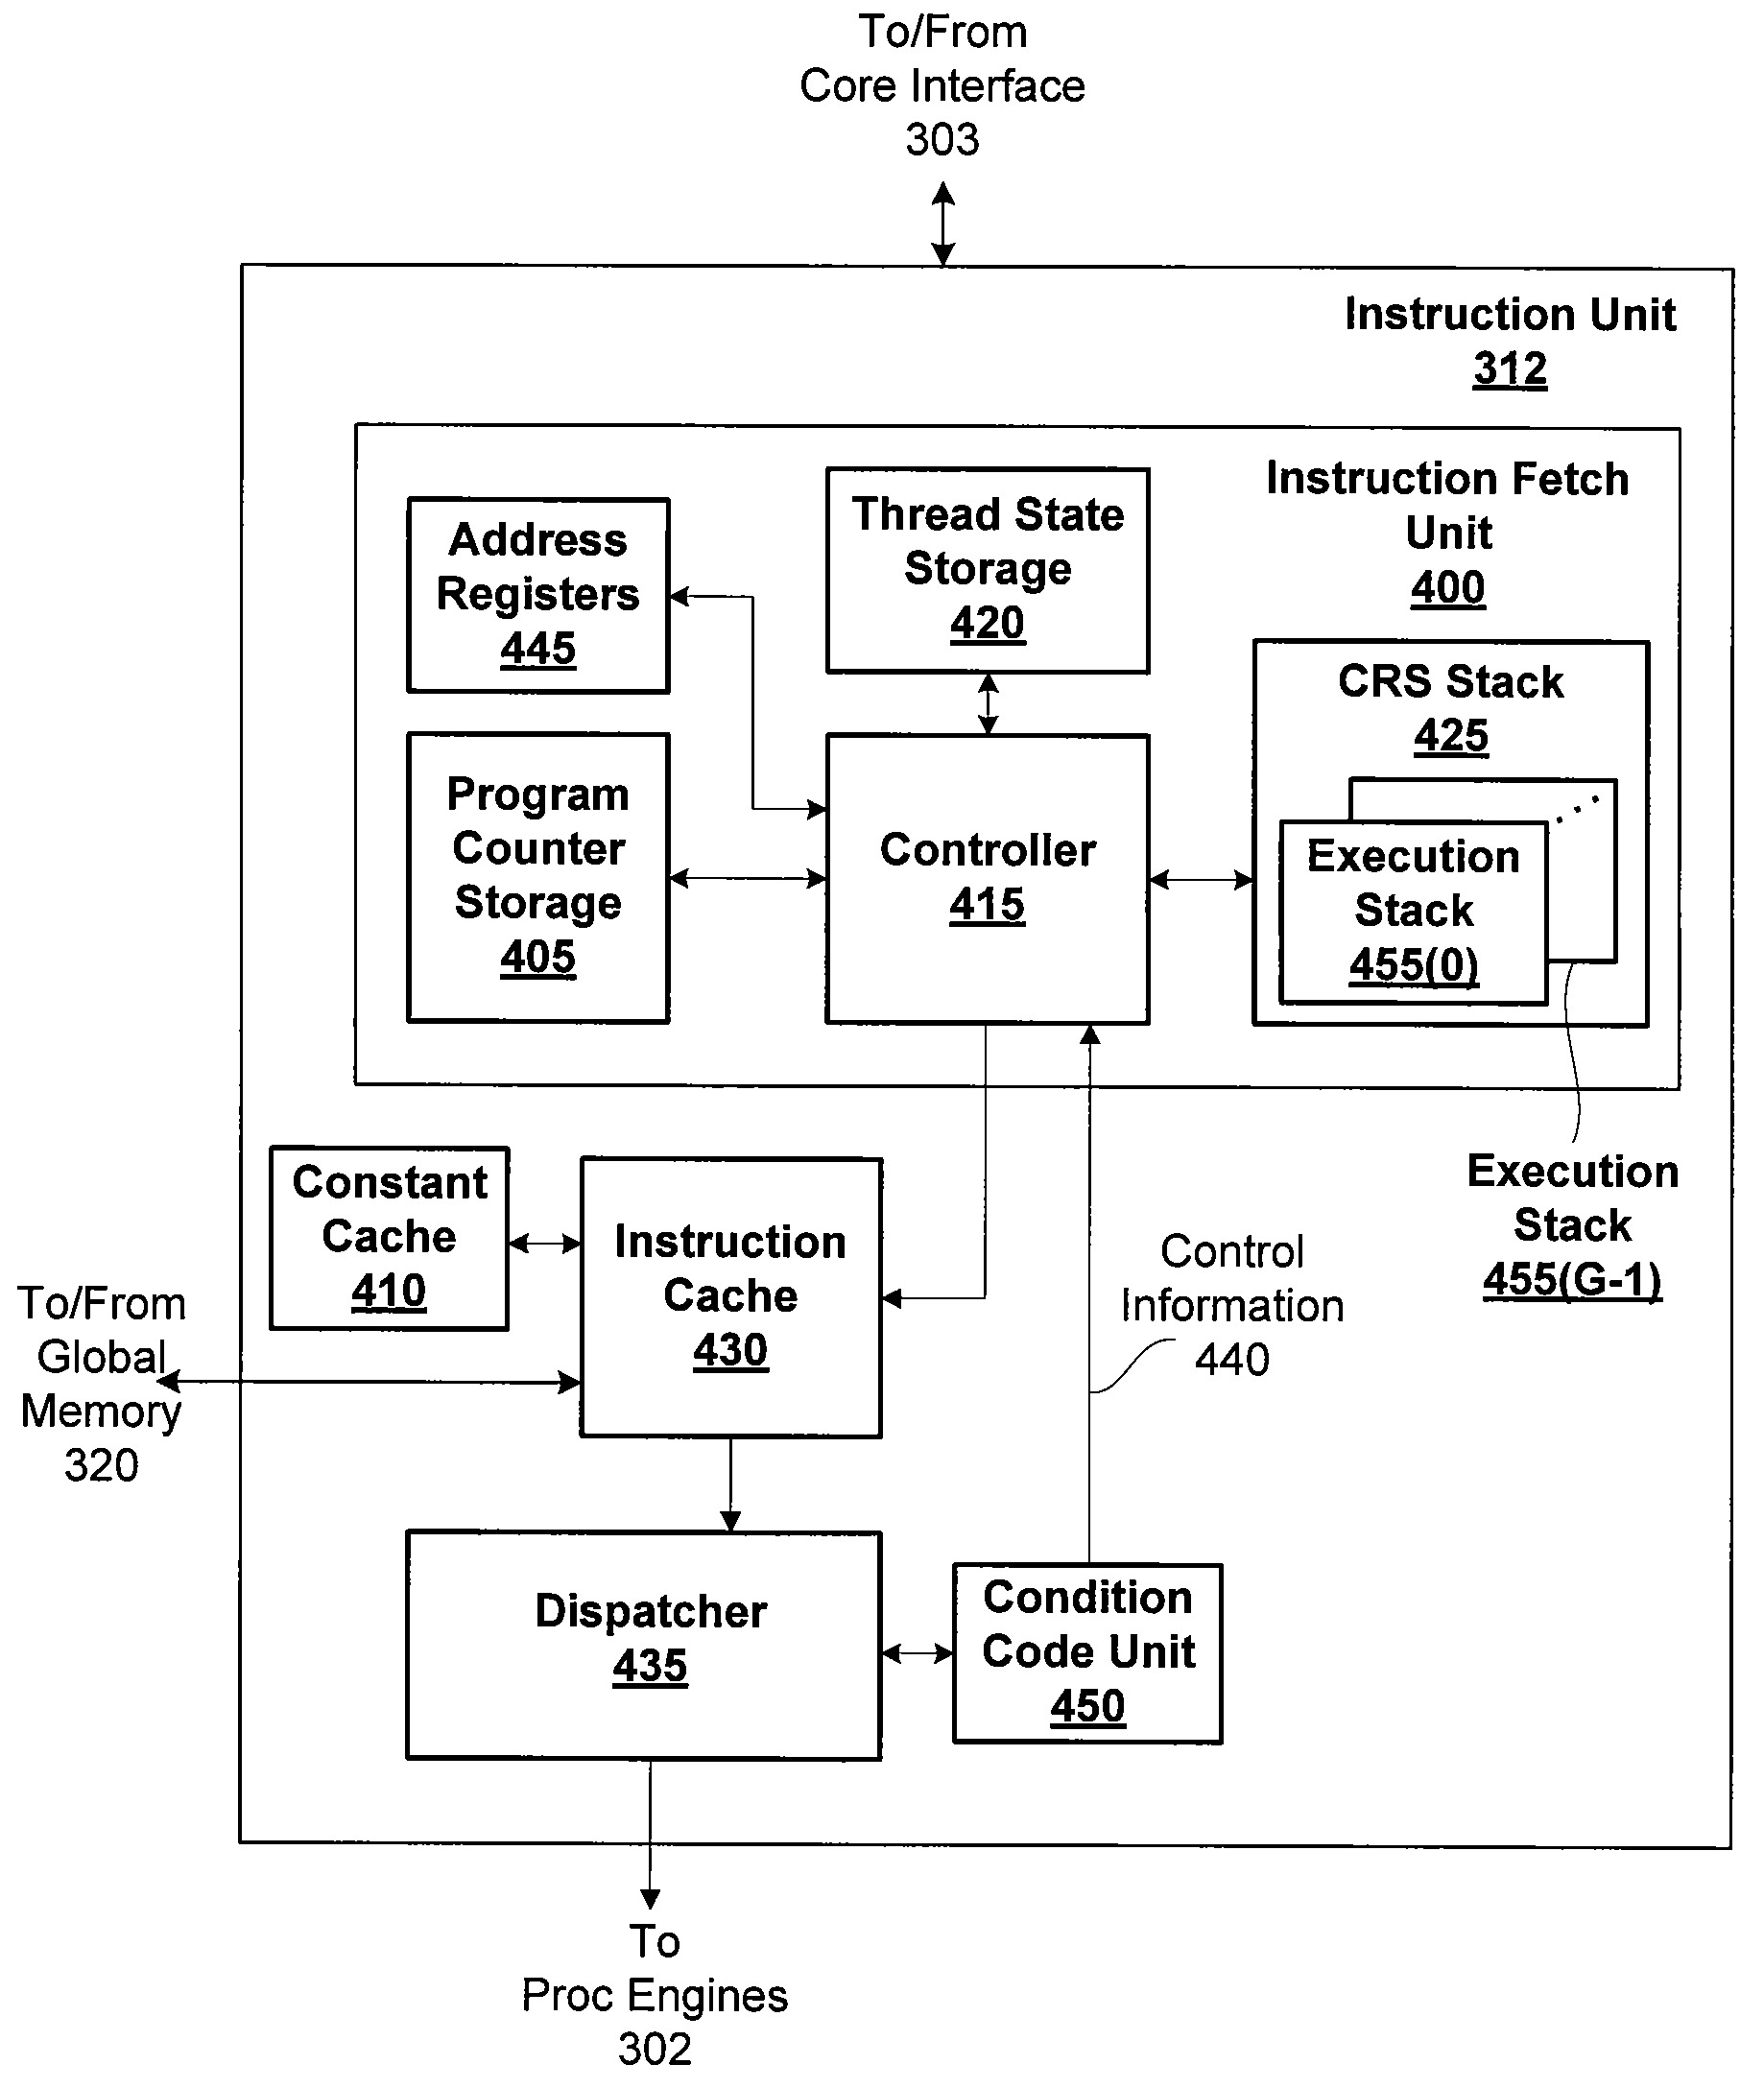 Indirect Function Call Instructions in a Synchronous Parallel Thread Processor